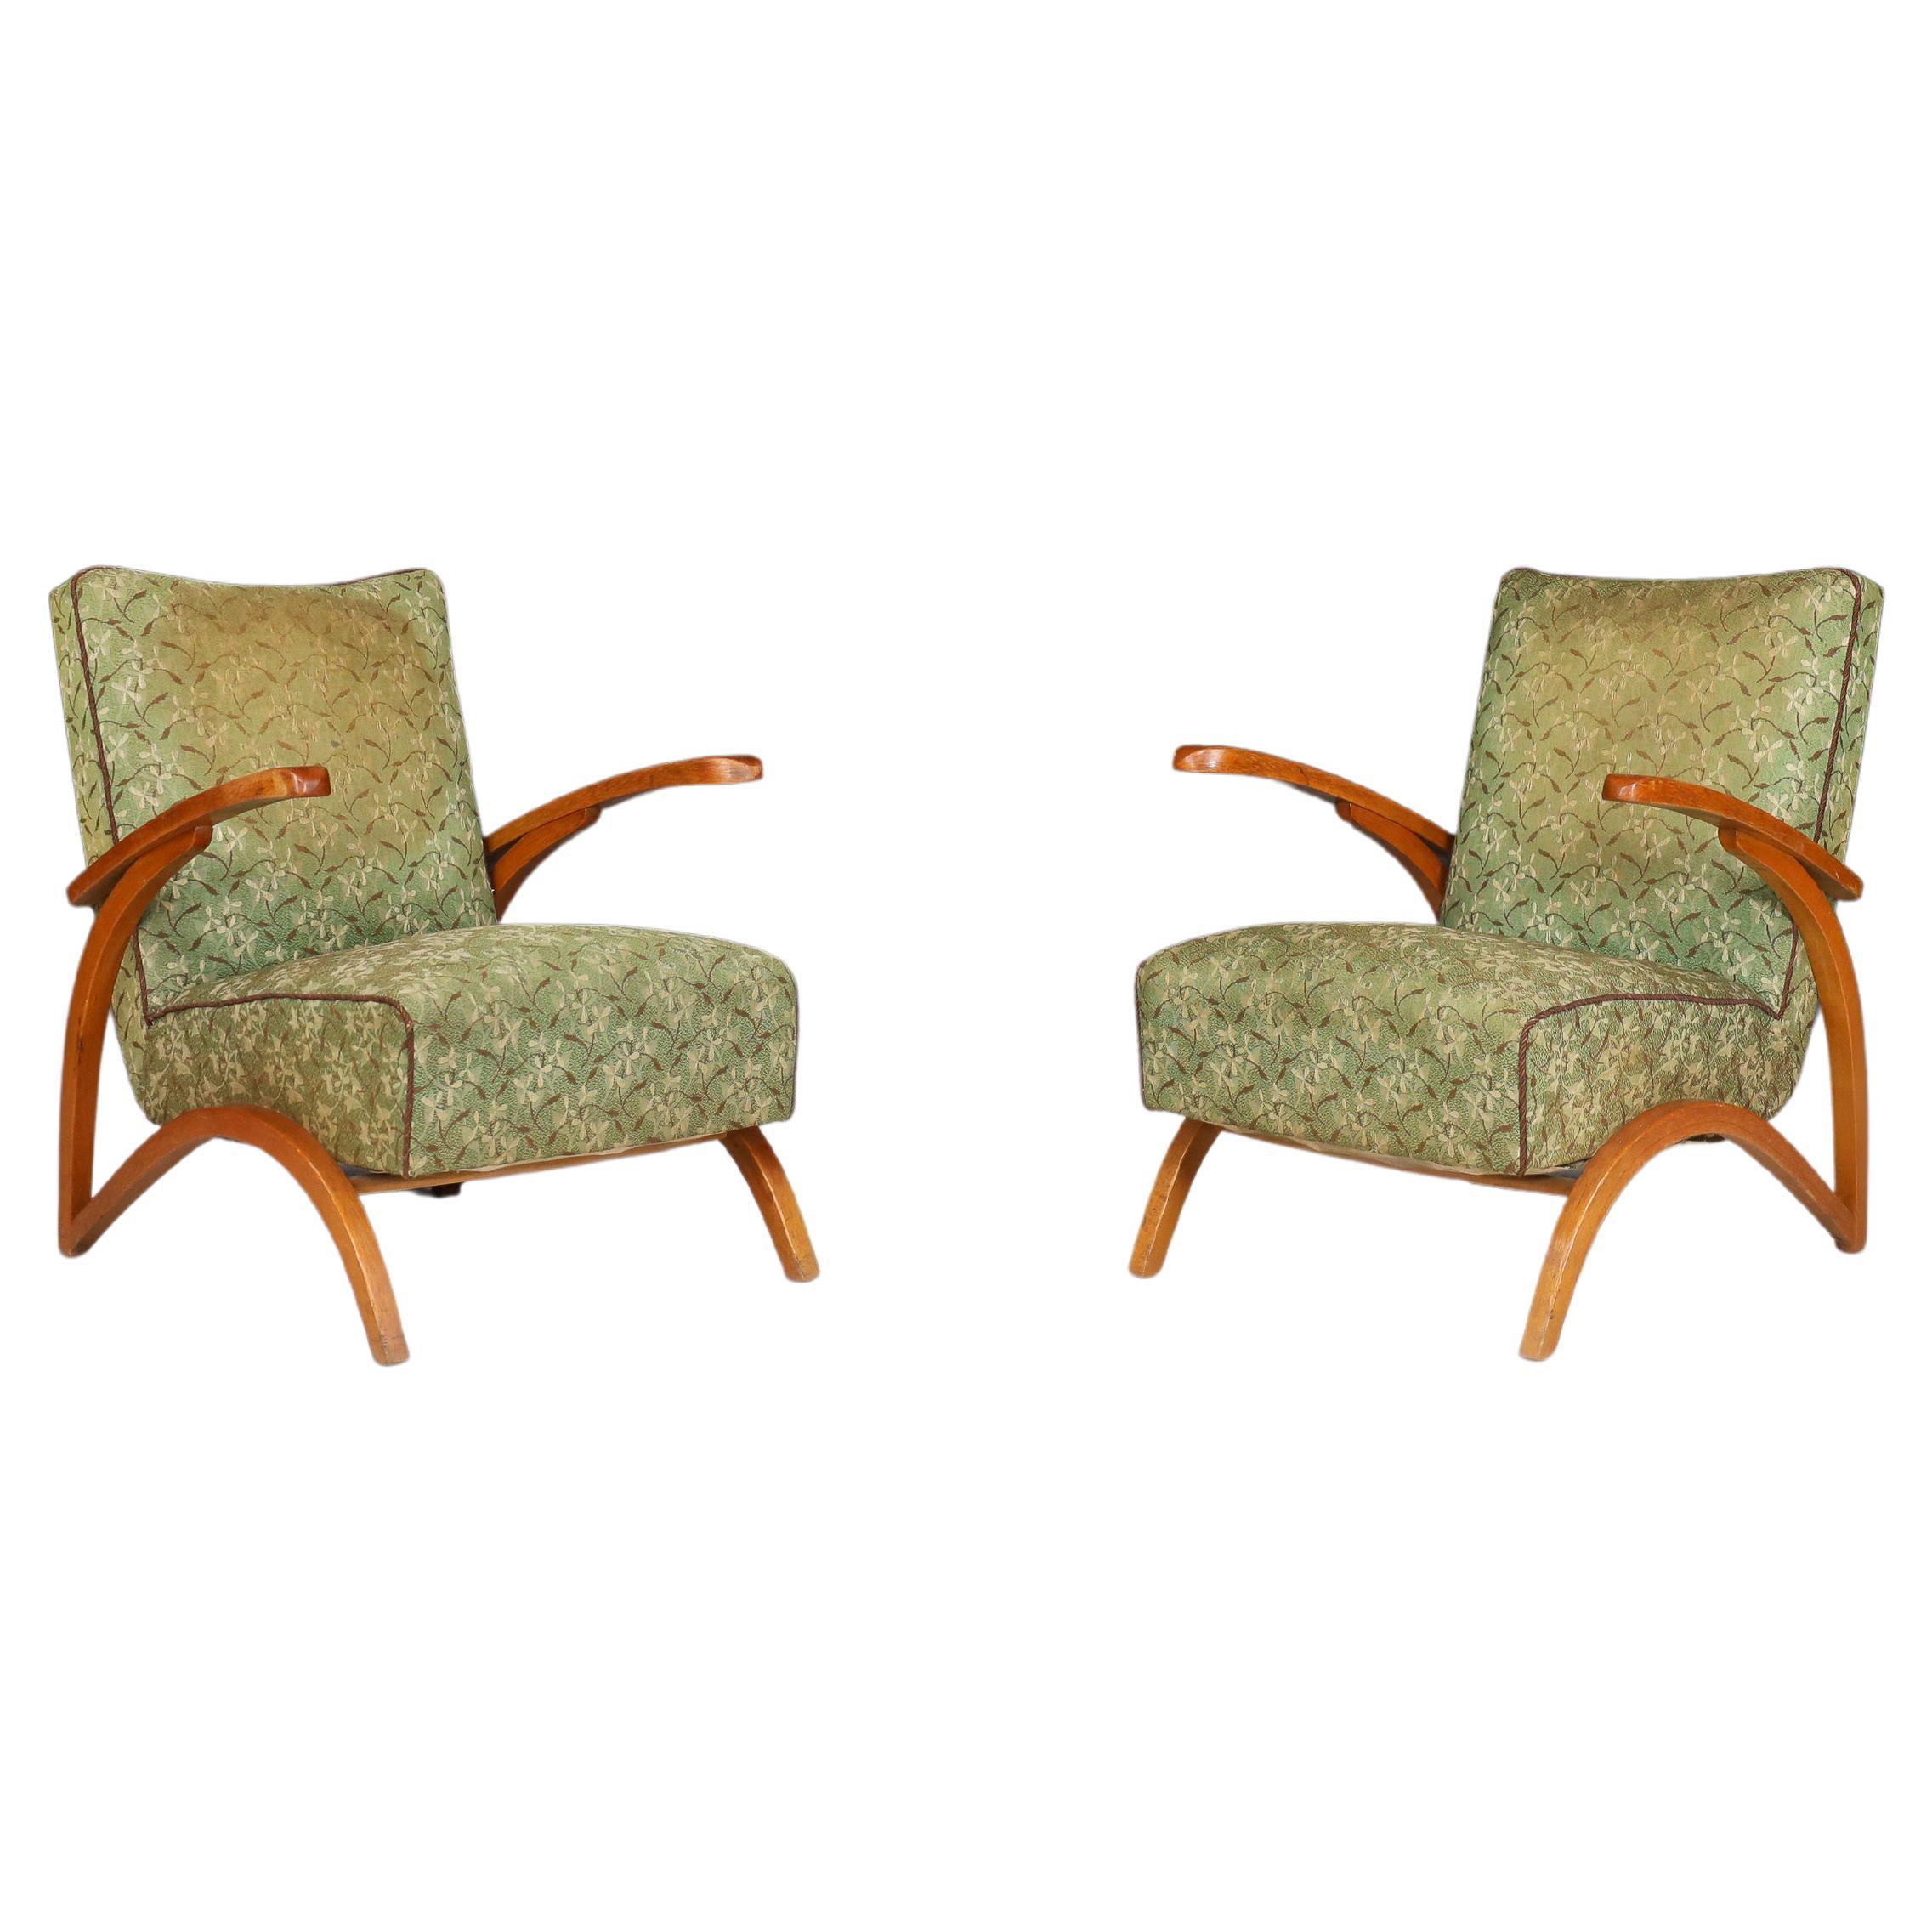 Art deco armchairs, and lounge chairs, by the Czech designer Jindrich Halabala C